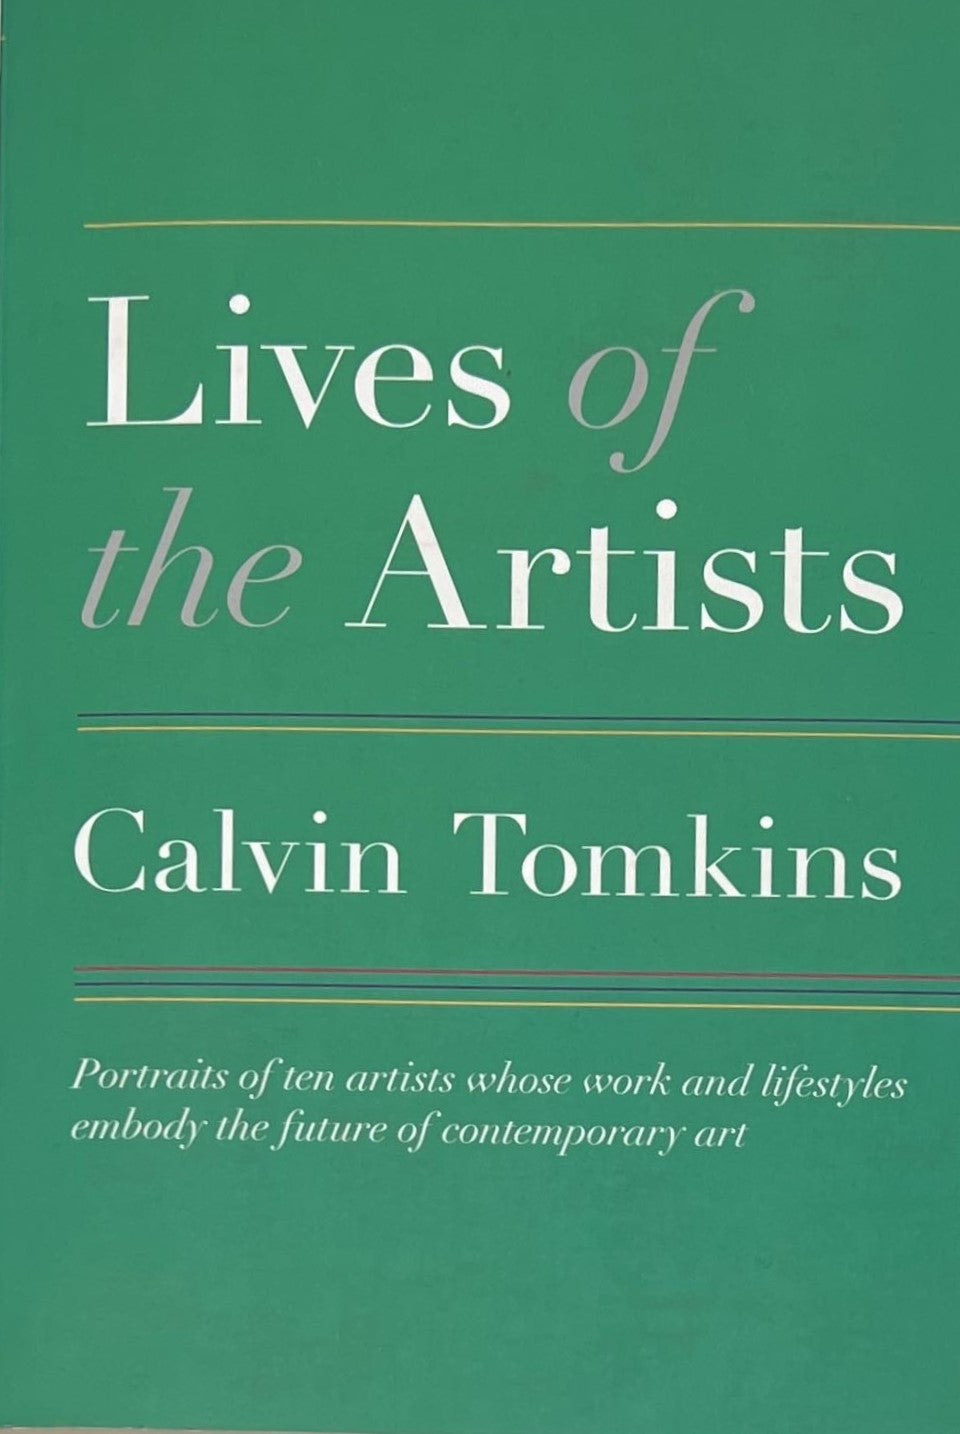 Tomkins, Calvin "Lives of the Artists"